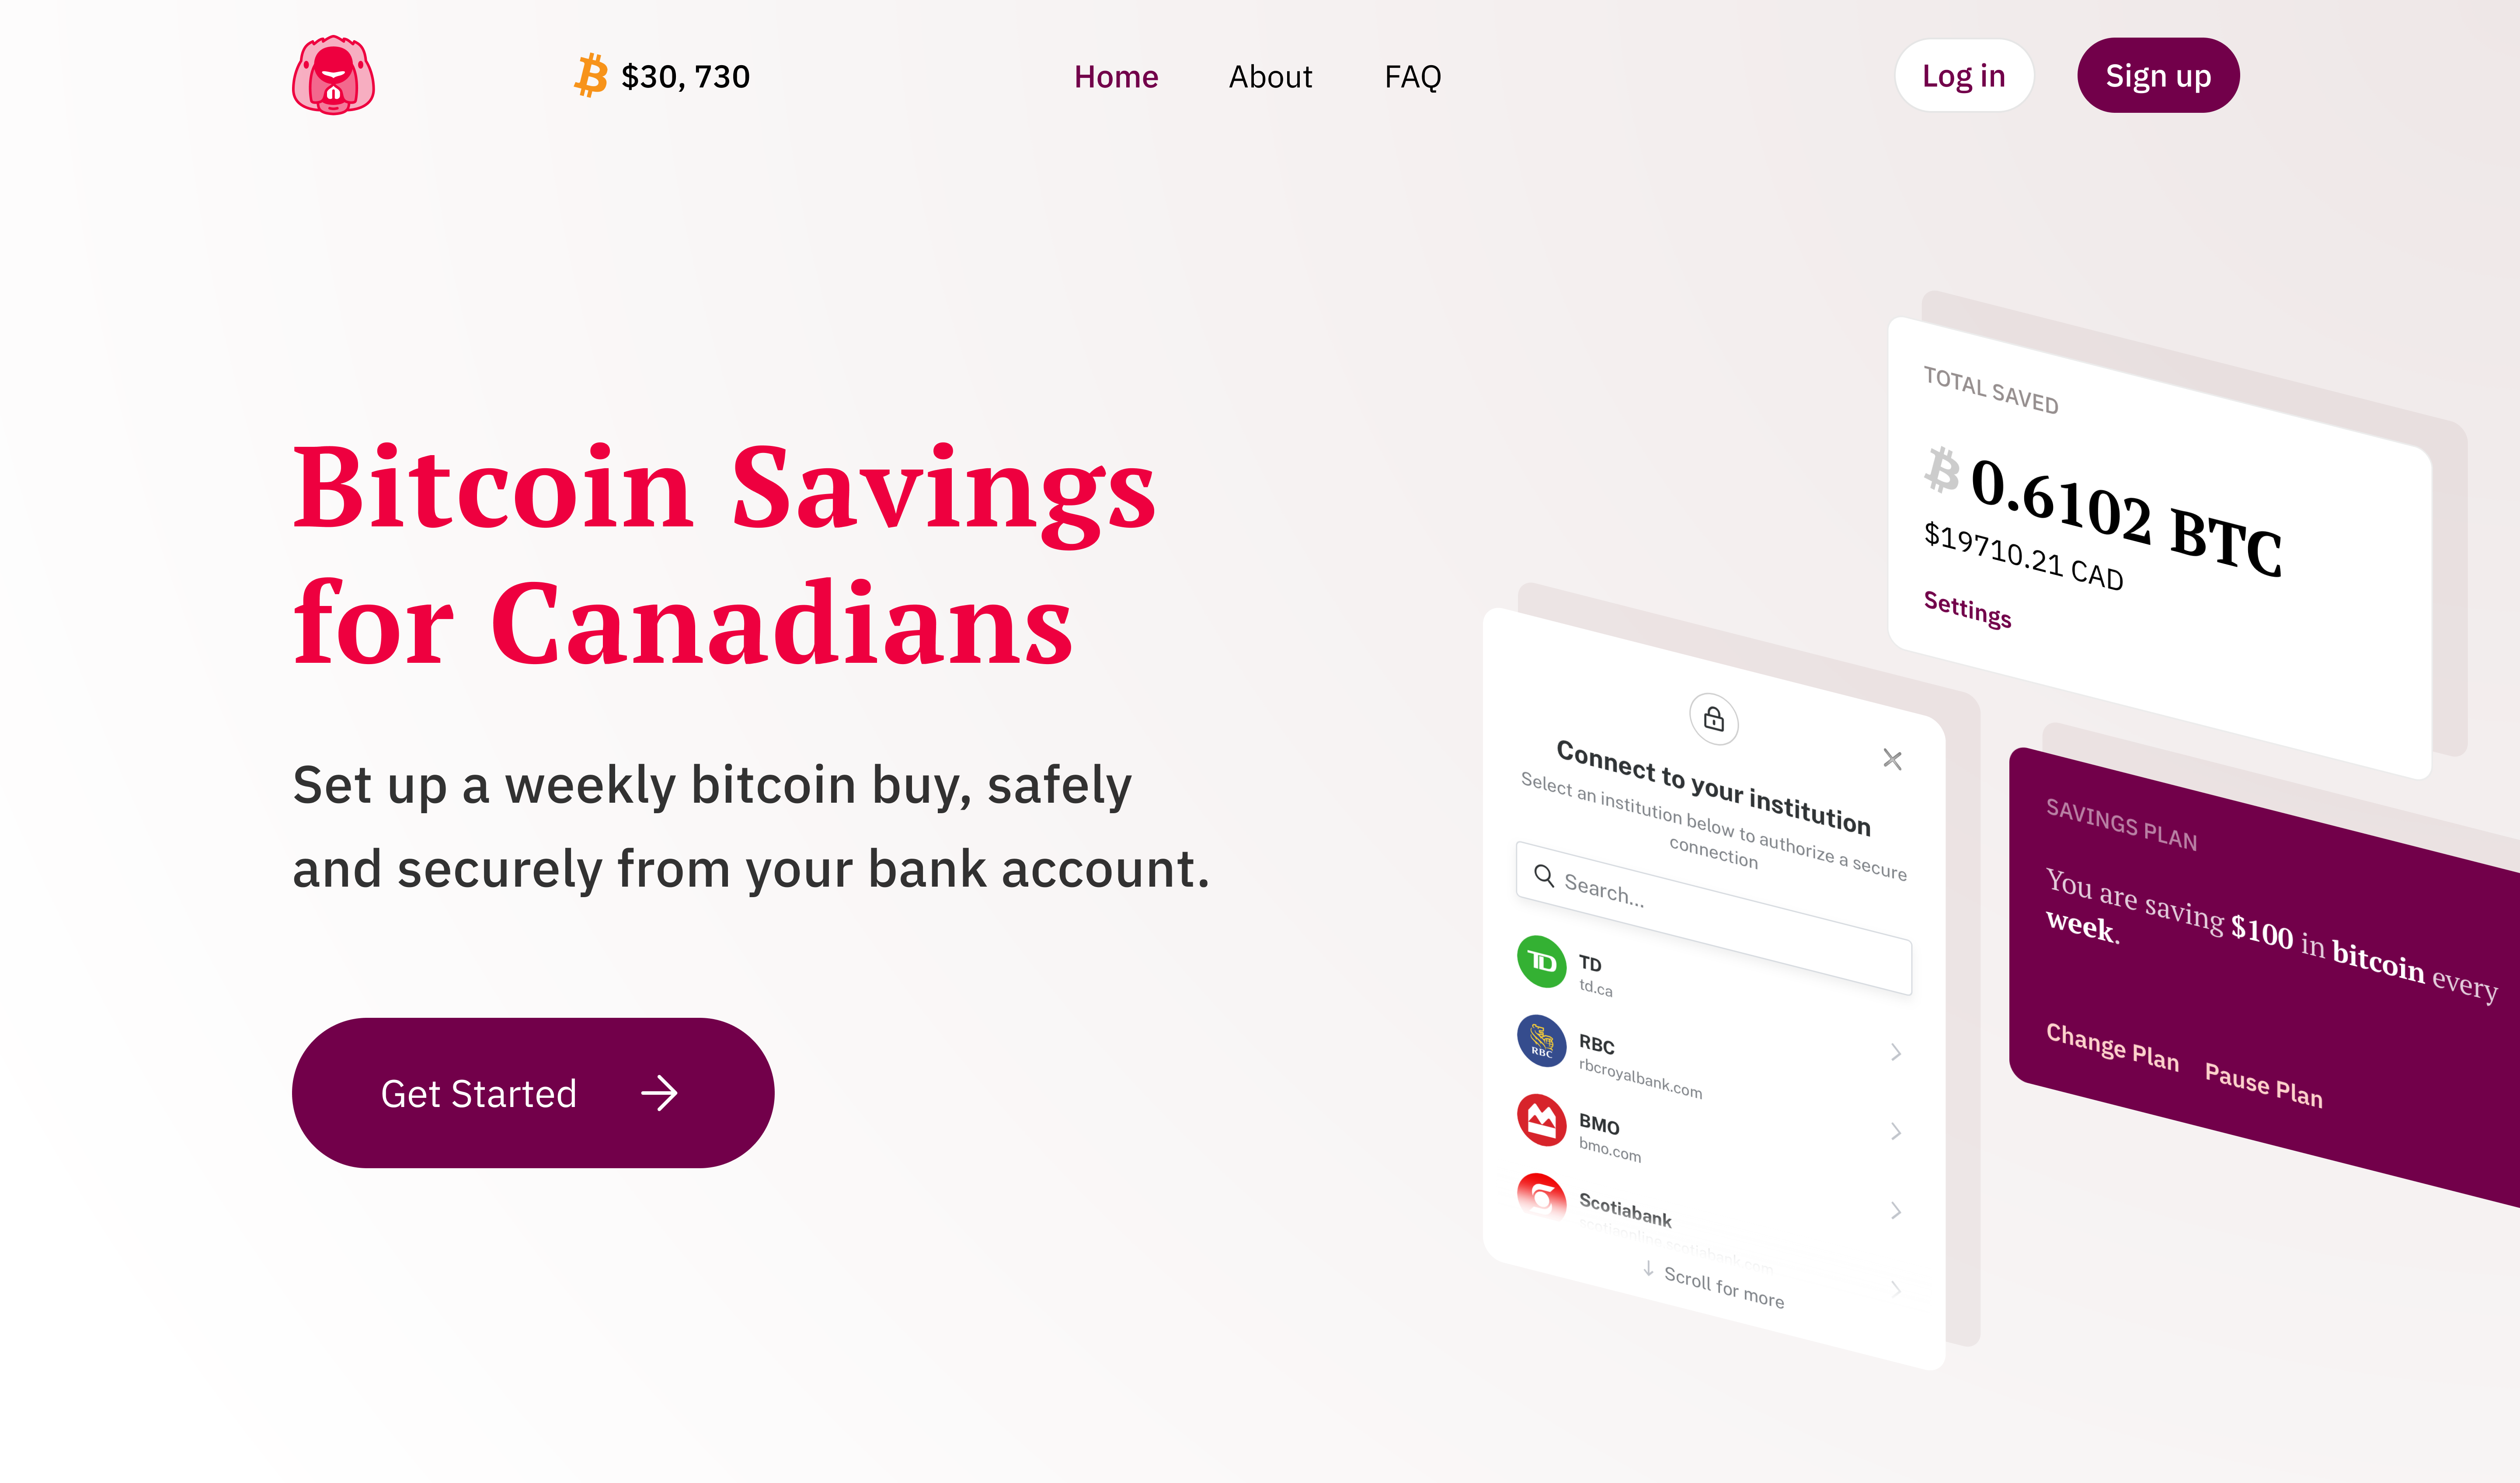 Toronto-based Beaver Bitcoin launches weekly bitcoin buys for Canadians thumbnail